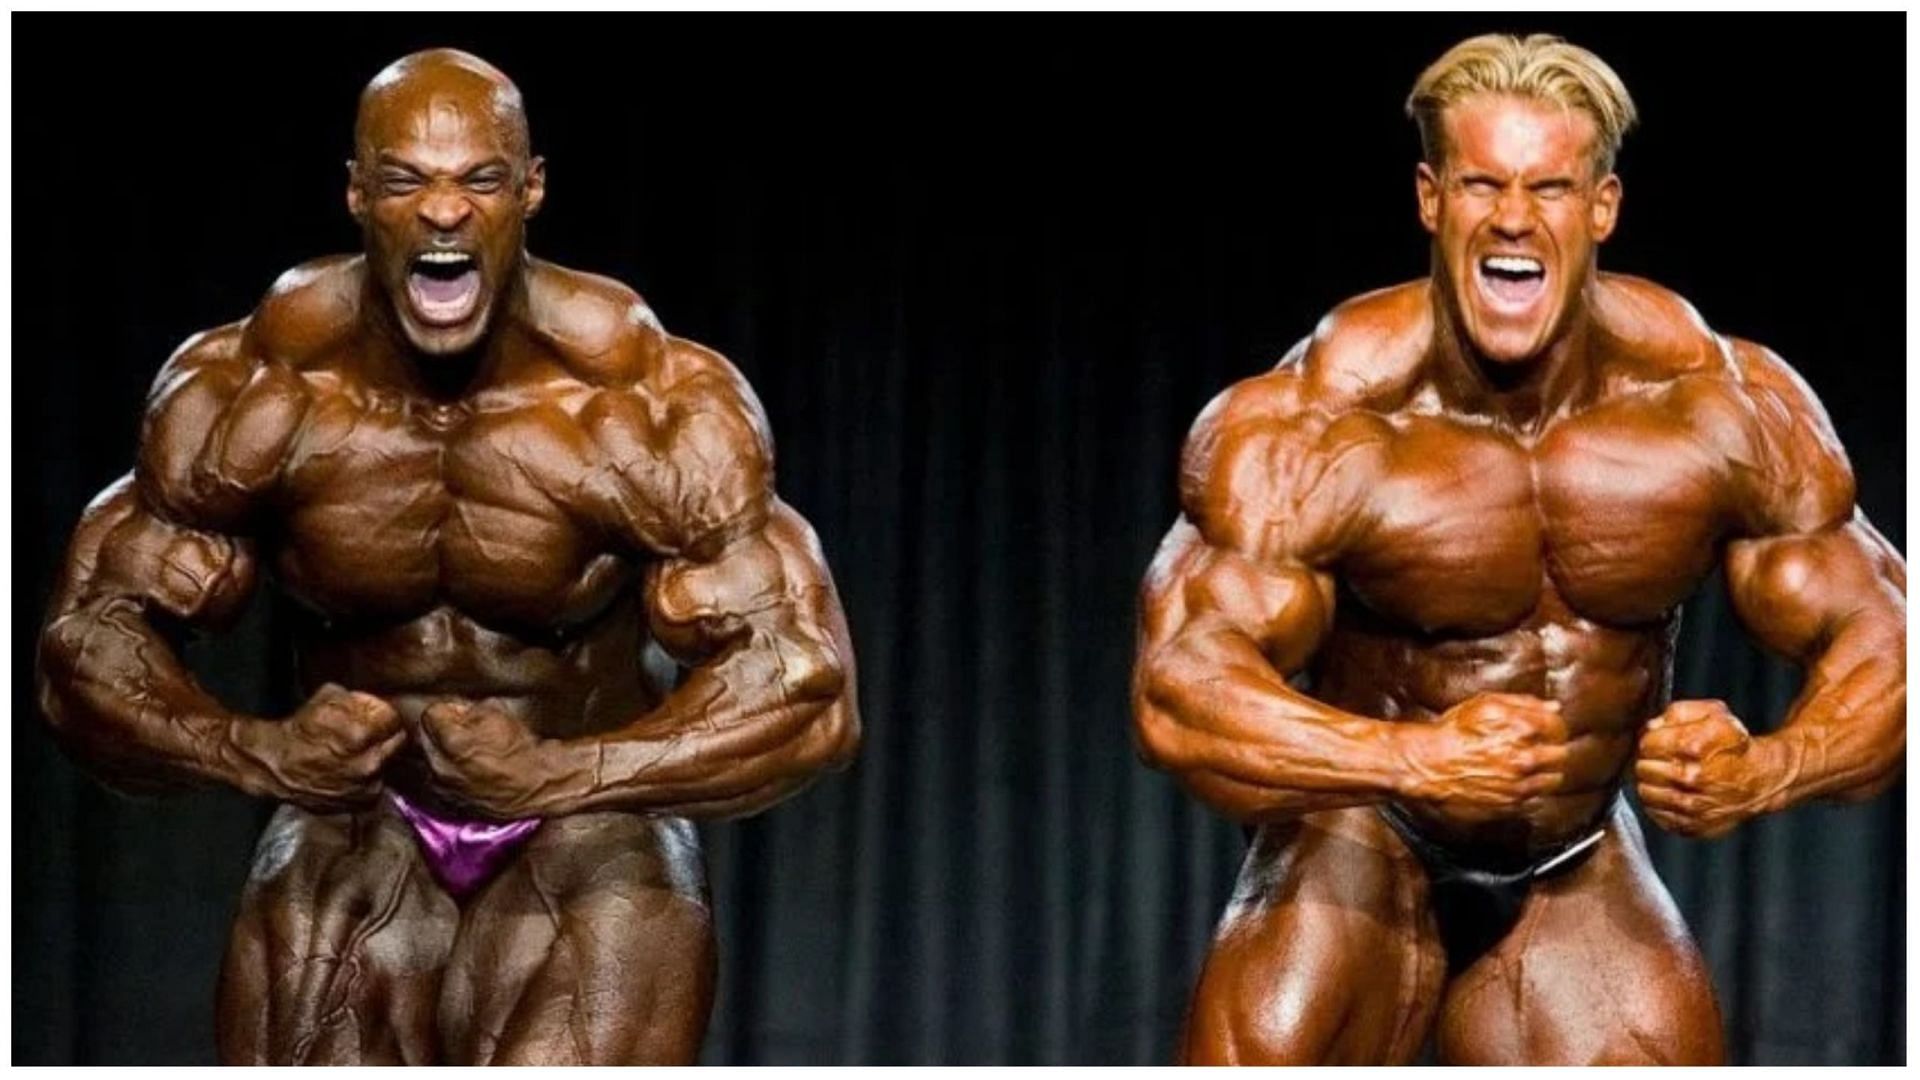 This sport is not worth dying for” - Ronnie Coleman on health issues in  bodybuilding